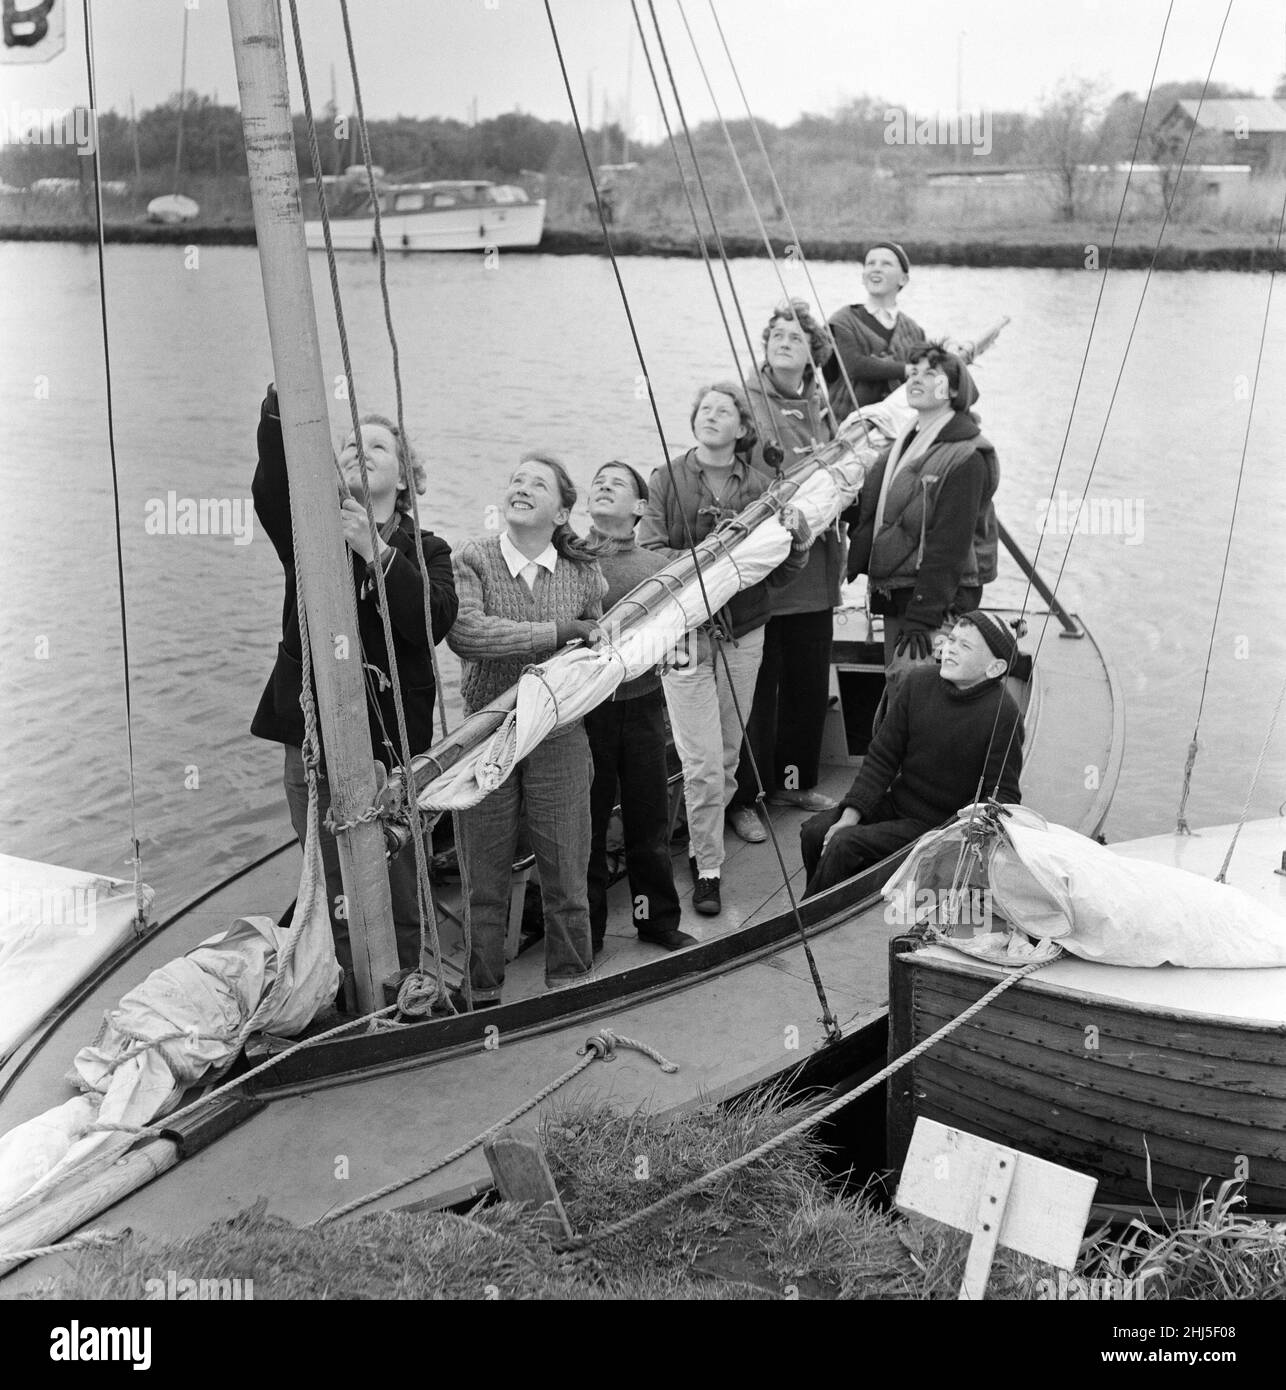 Pupils of Clarendon Secondary Modern School, South Oxhey, Watford, Hertfordshire, taking a course in yachting and seamanship on the Norfolk Broads during school holidays. The children aged from 12 upwards, spend a week under canvas and are able to spend the days receiving instructions on sailing vessels of various sizes. They are under the instruction of 28 year old Crafts master Allen Standley and 21 year old Maths and English teacher Yvonne Chapman. 28th April 1957. Stock Photo